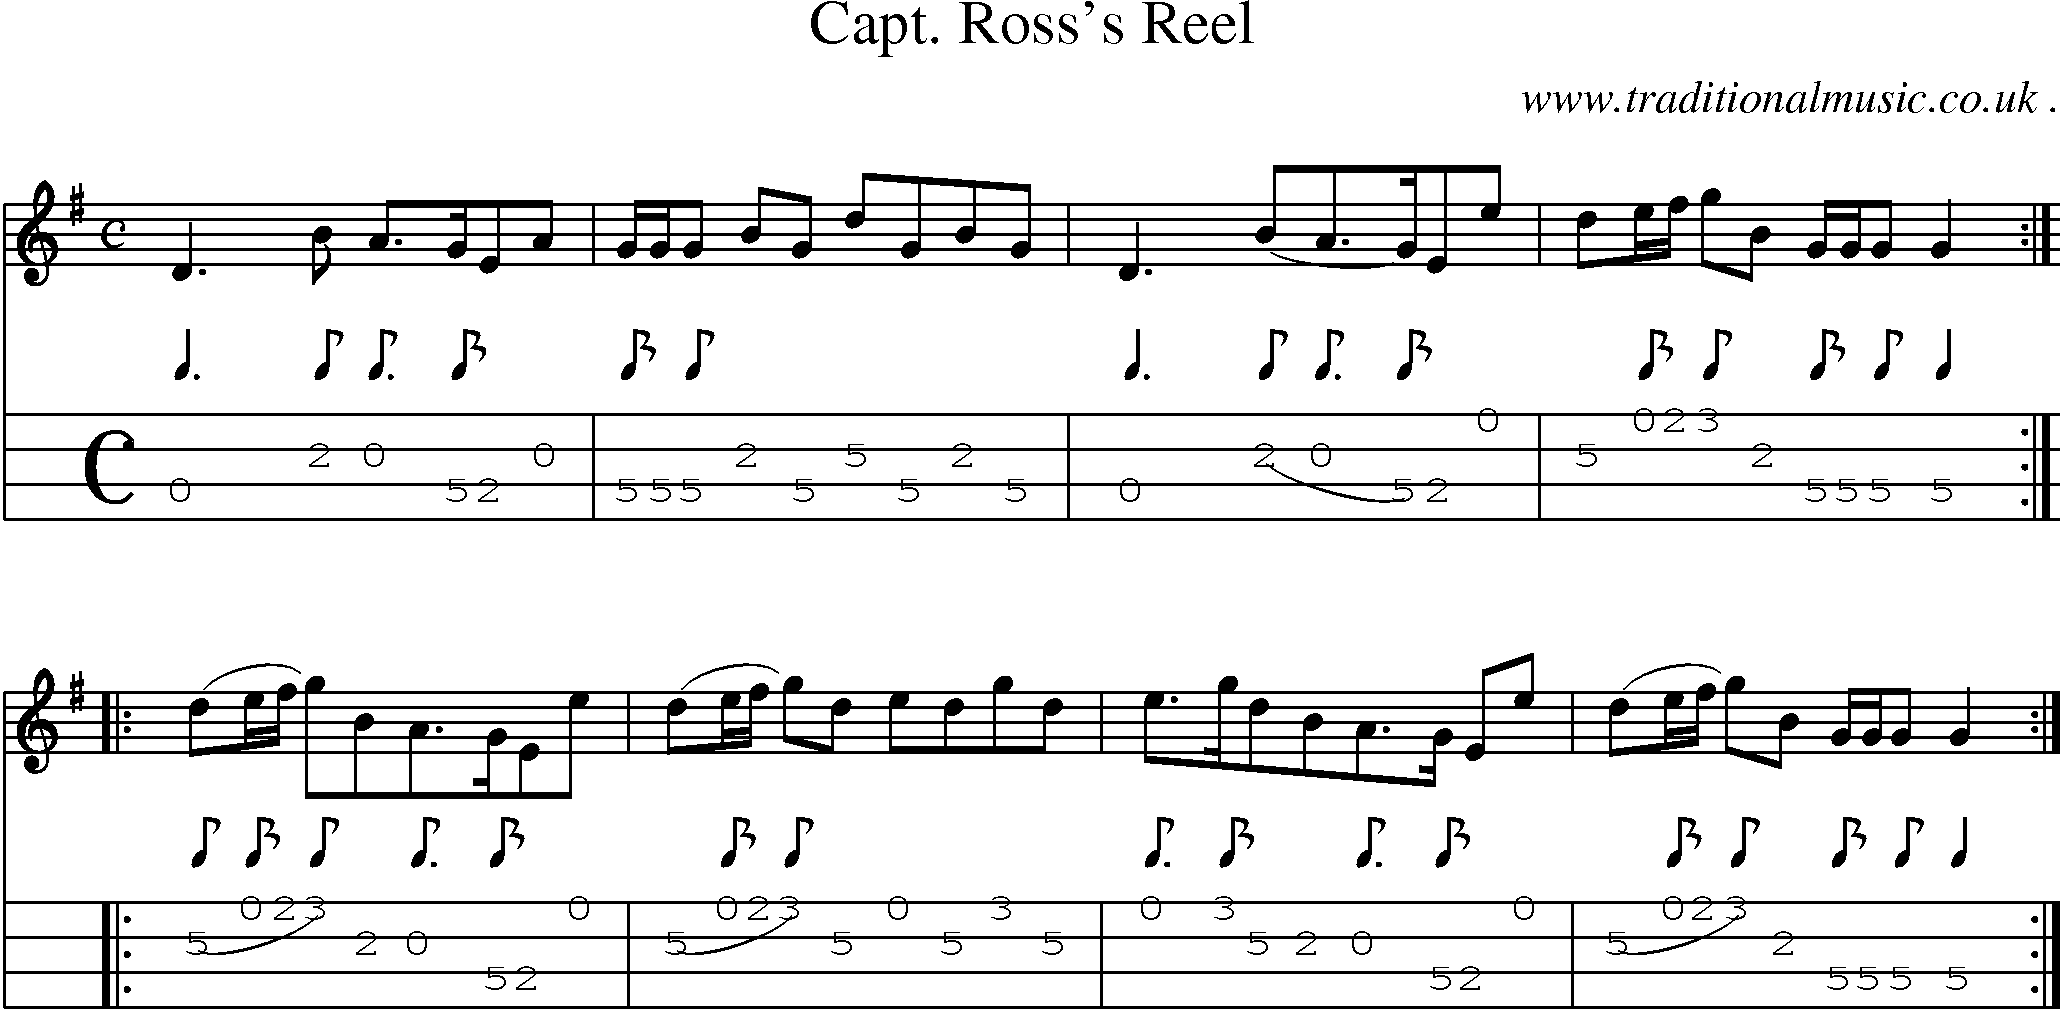 Sheet-Music and Mandolin Tabs for Capt Rosss Reel